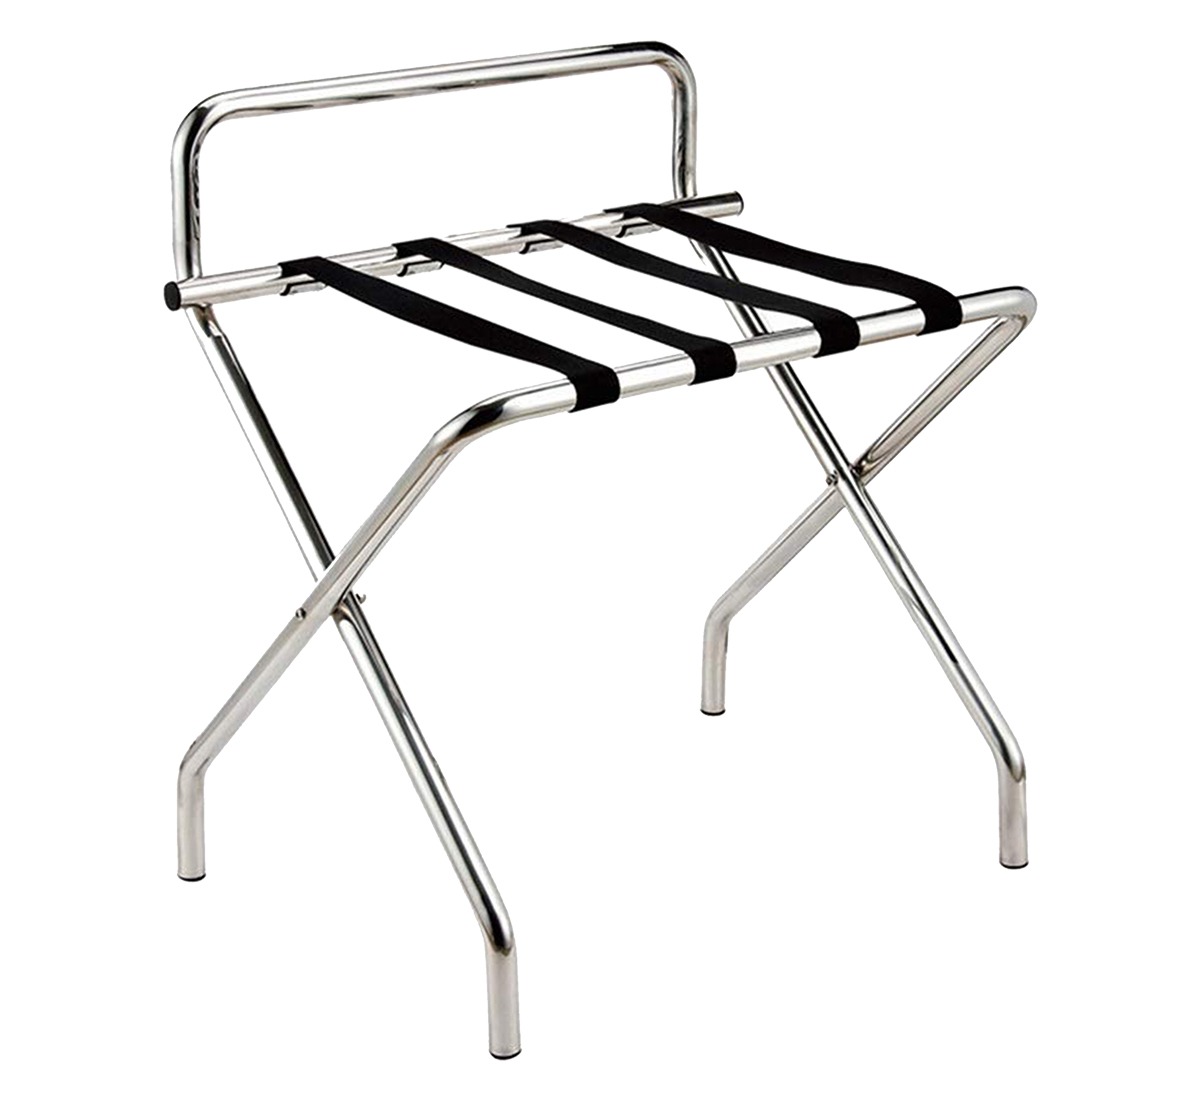 Stainless Steel Luggage Rack with Nylon Straps
